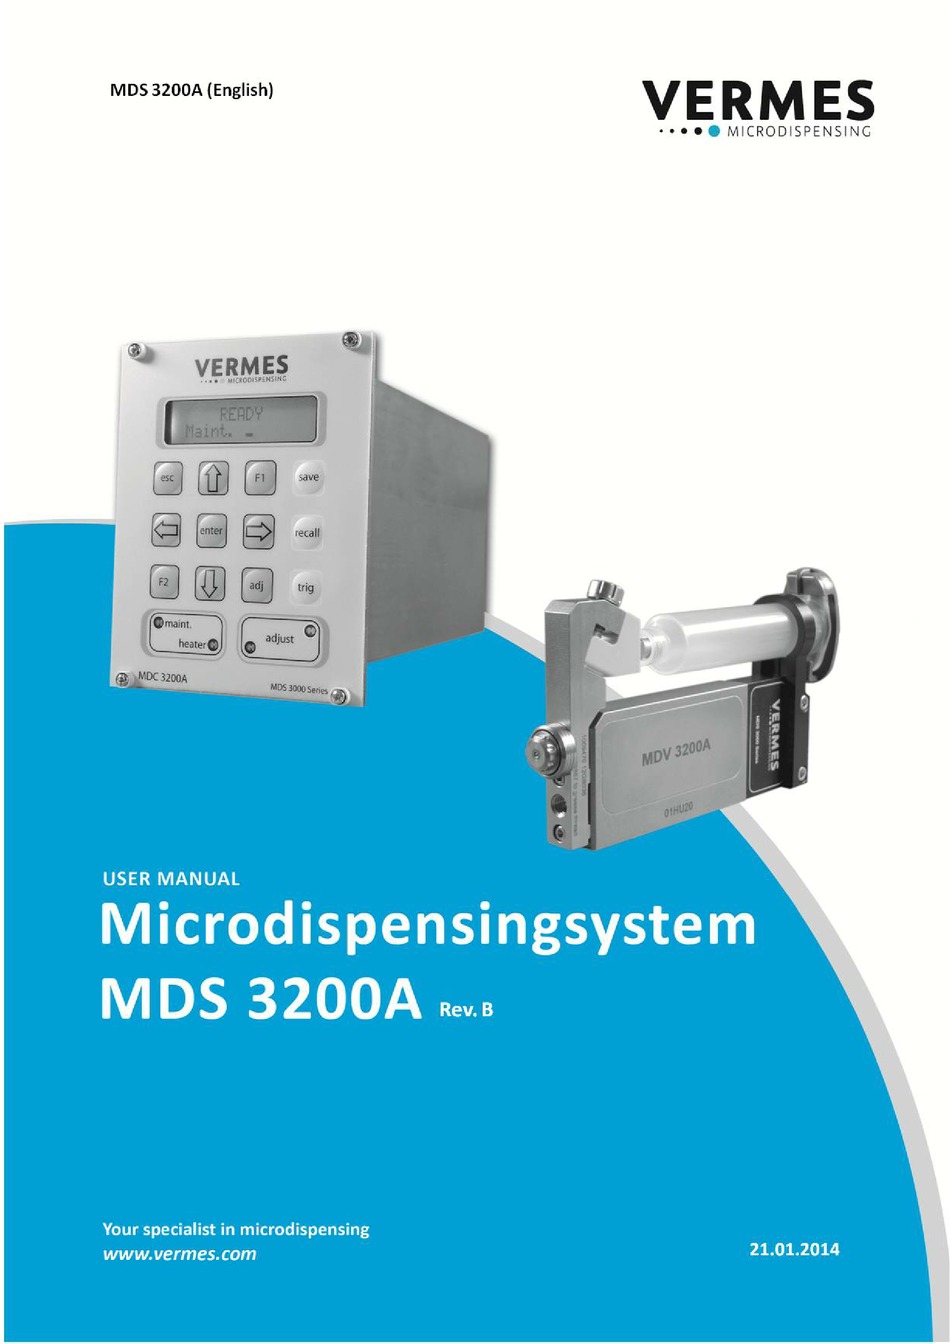 VERMES Microdispensing opens new office in Midwest, USA - VERMES